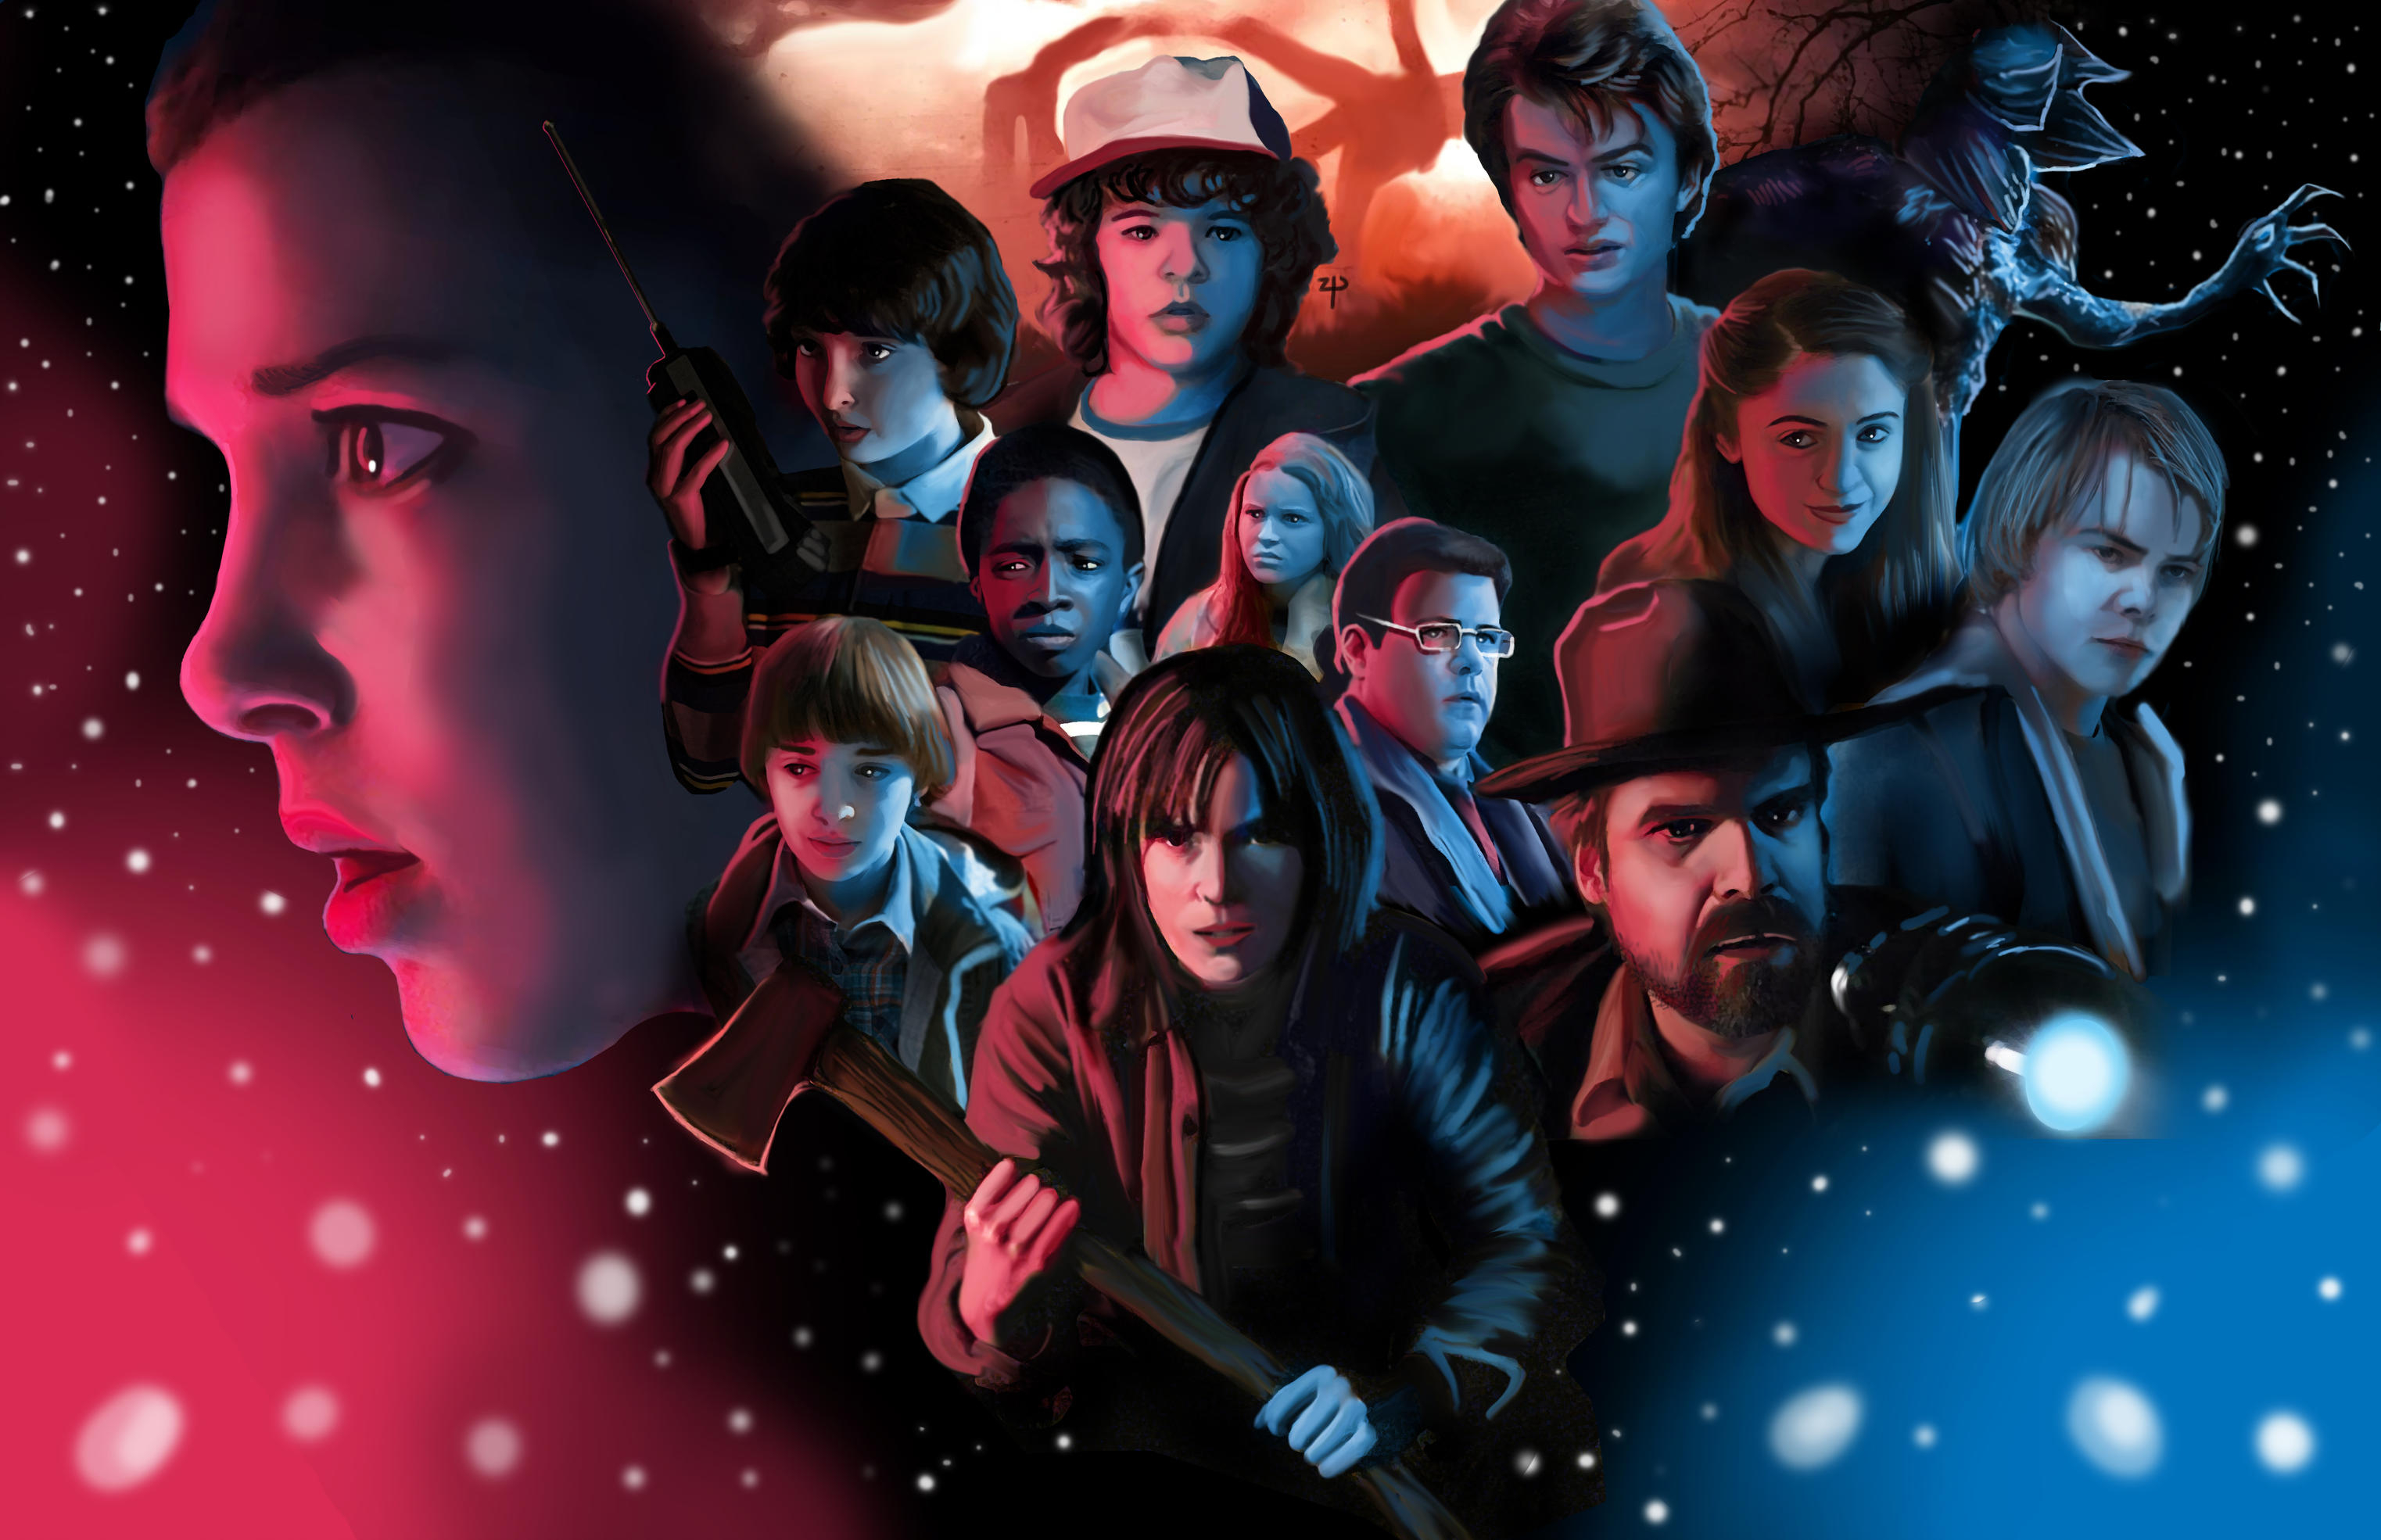 Stranger Things season 3 review no spoilers charming but frustrating   Vox